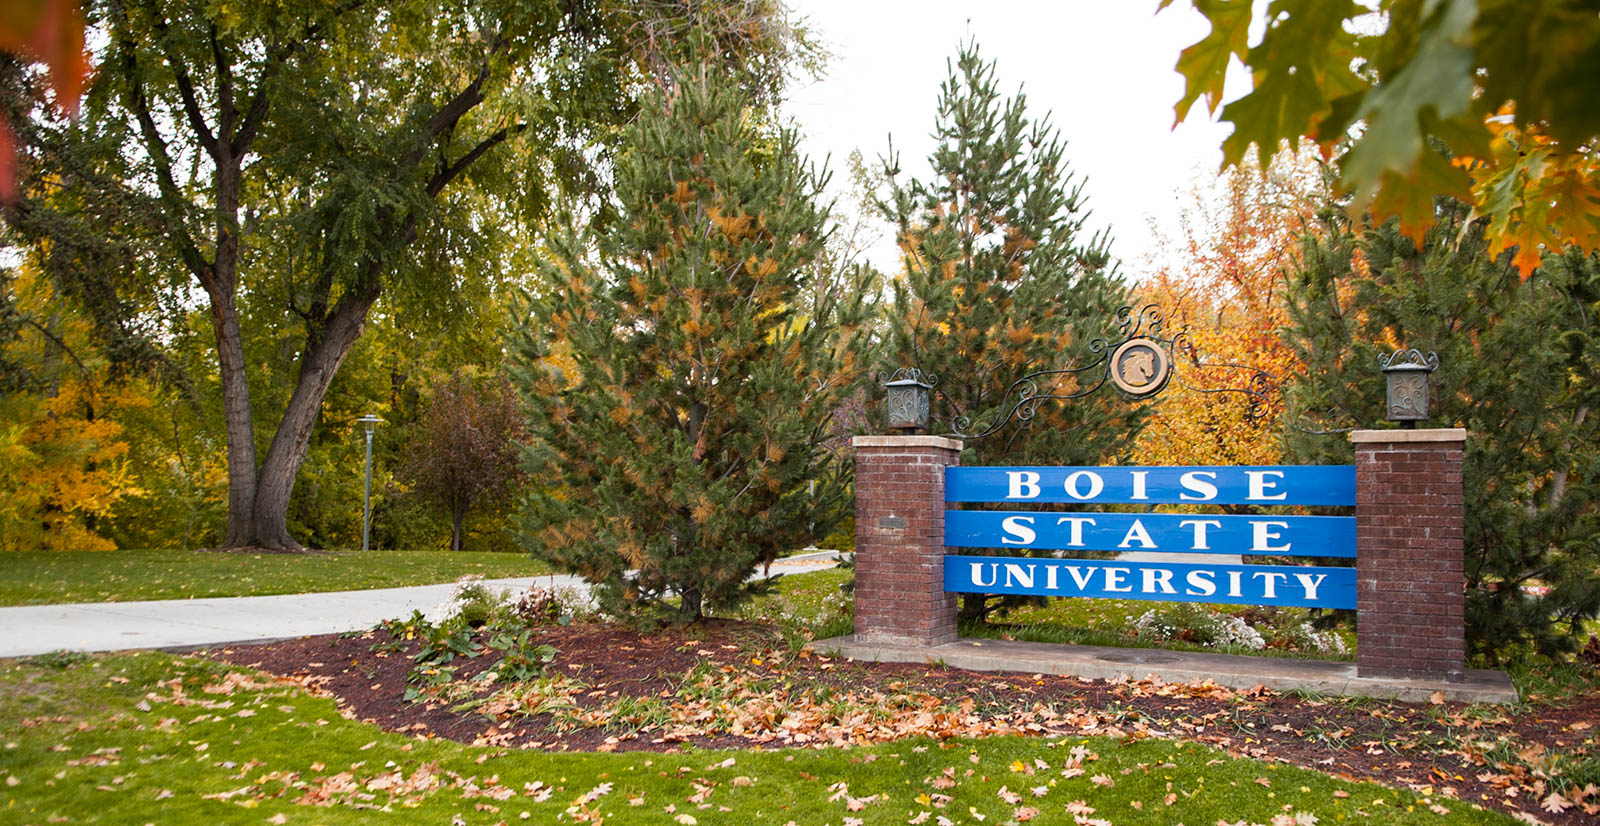 Boise State Sign on University Drive in Fall